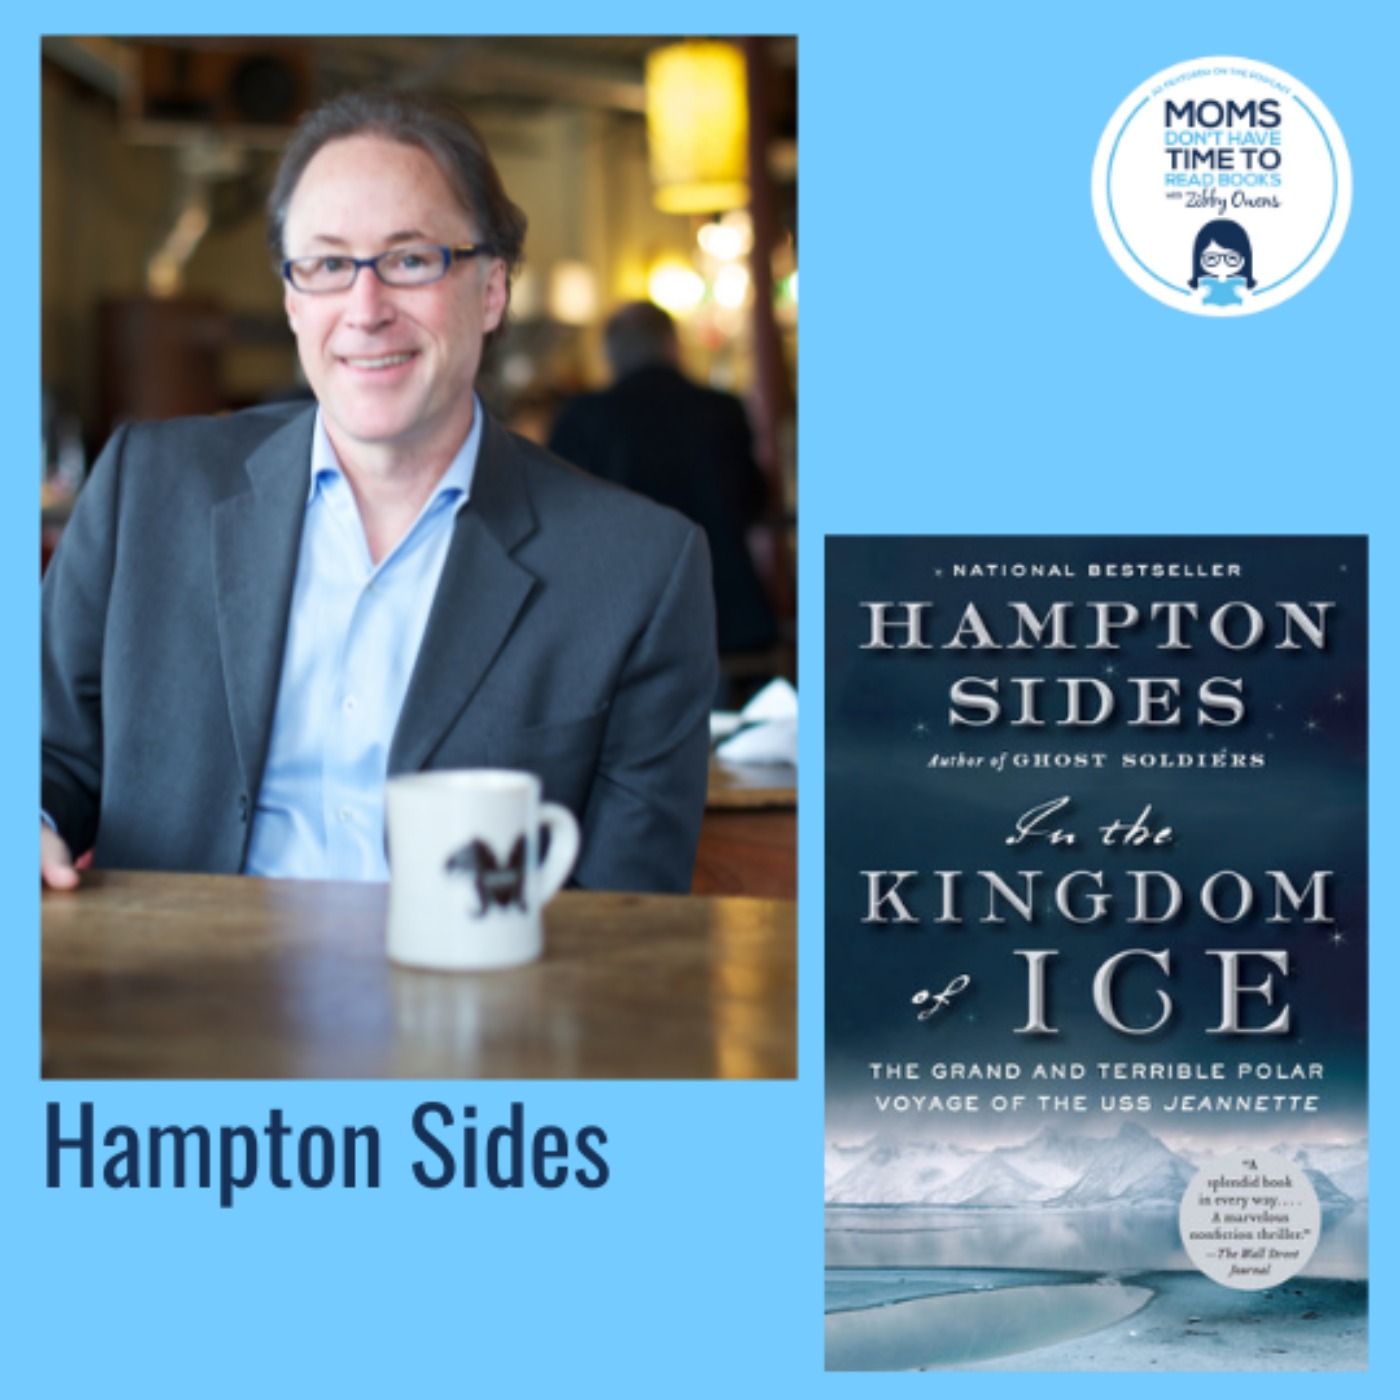 Hampton Sides, IN THE KINGDOM OF ICE: The Grand and Terrible Polar Voyage of the USS Jeannette